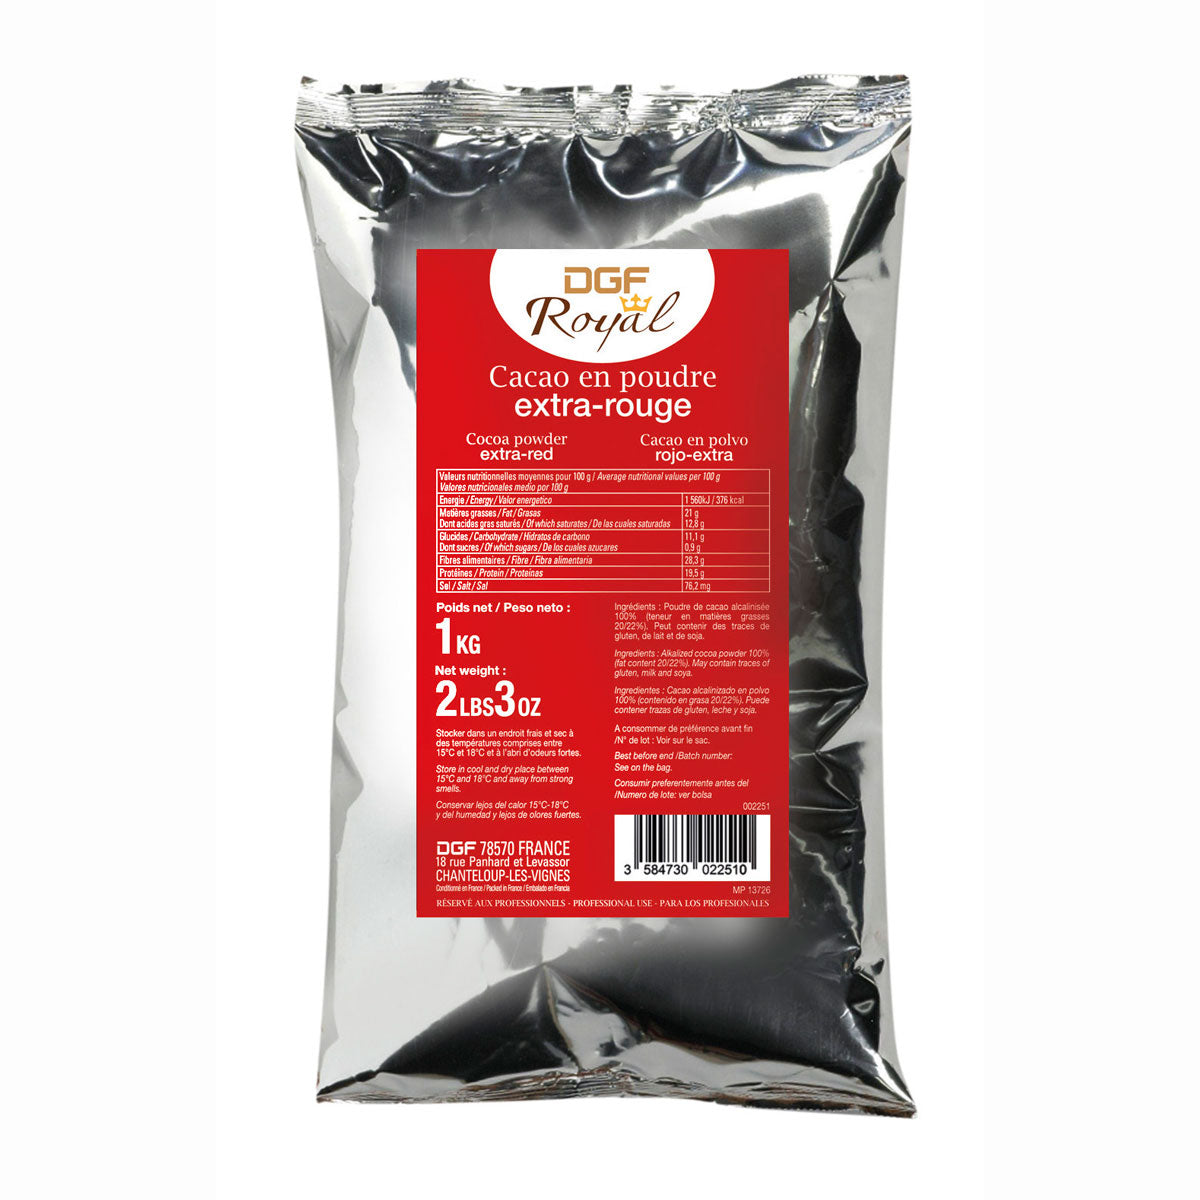 Extra red cocoa powder in bag packaging